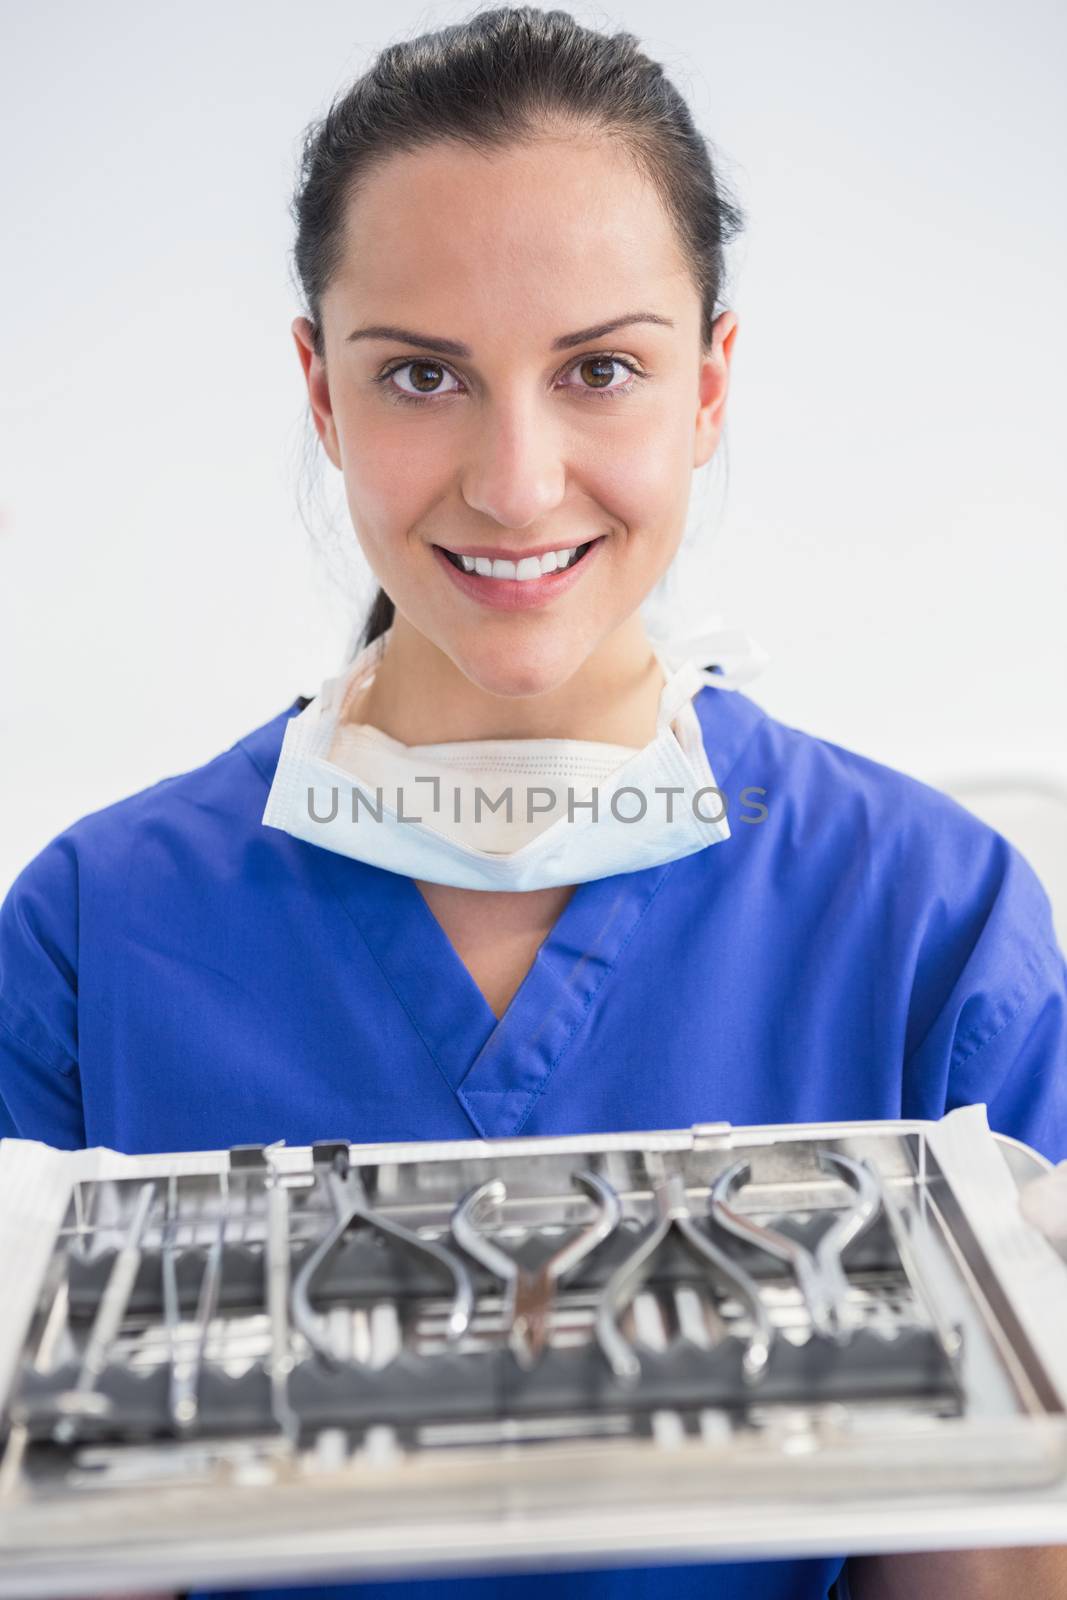 Smiling dentist holding tray with equipment  by Wavebreakmedia